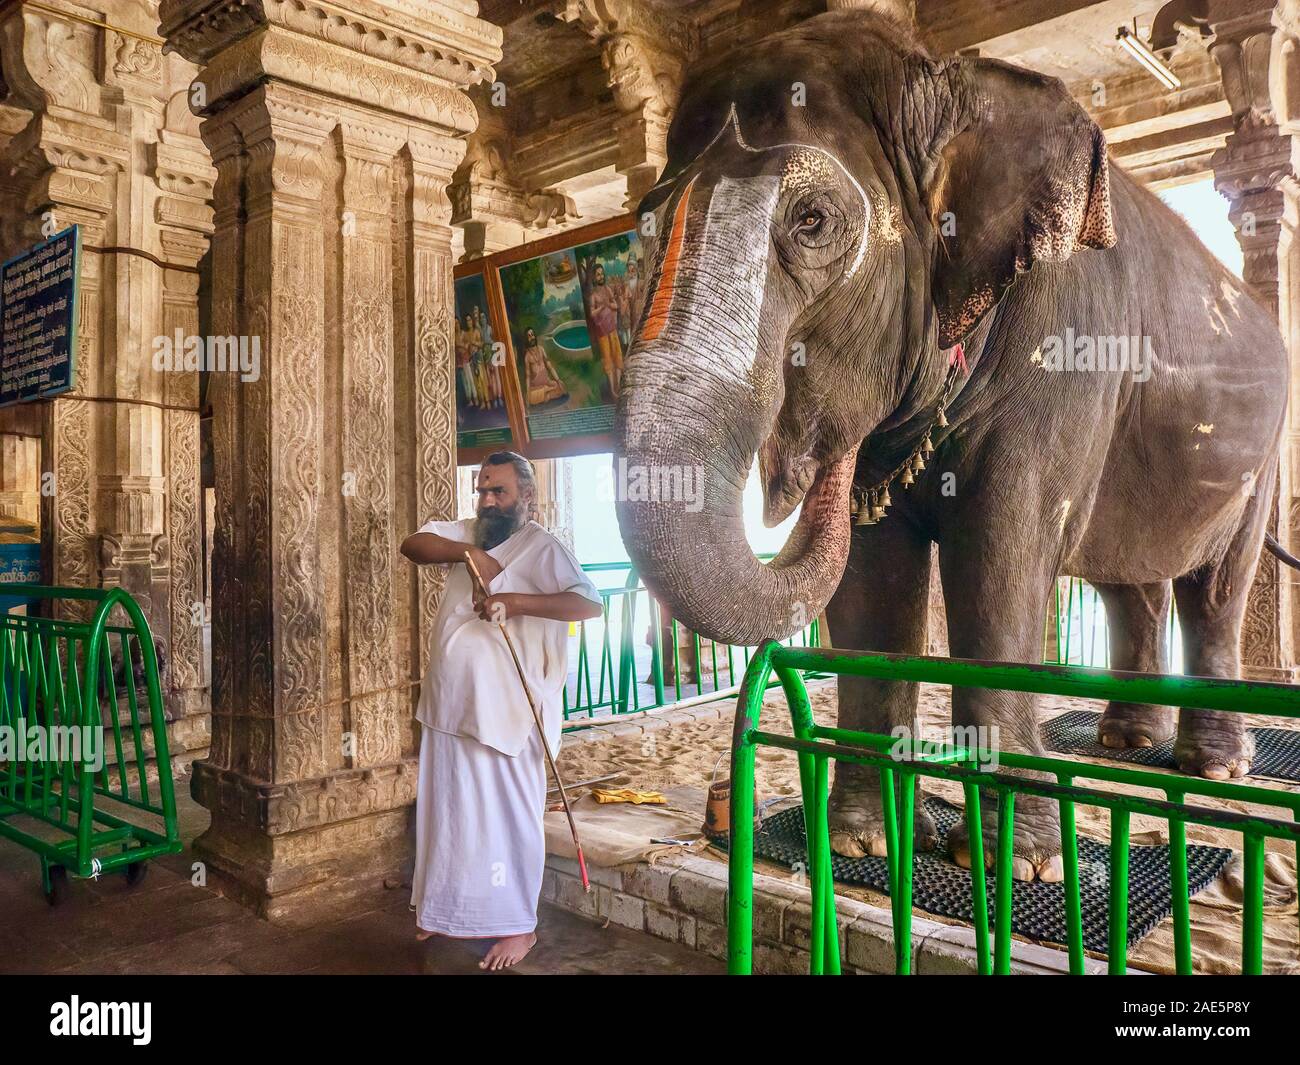 A female temple elephant working in a Hindu temple, who blesses devotees by placing her trunk on their heads. Stock Photo